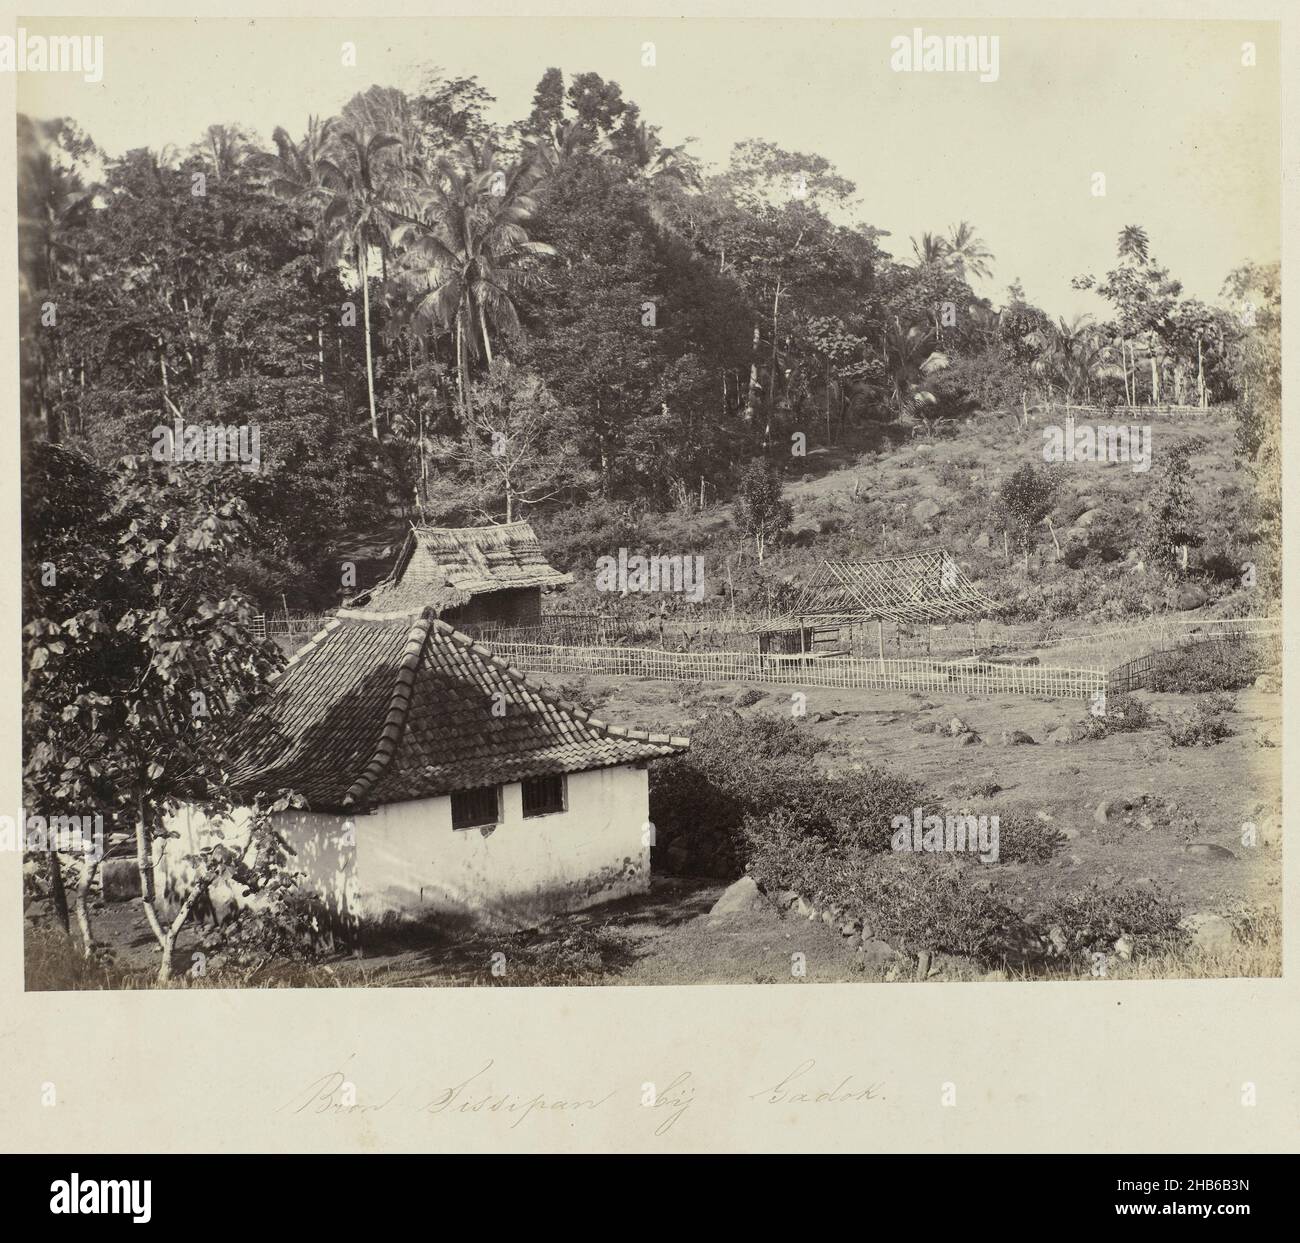 Spring Tissipan near Gadok (title on object), View of the spring Tissipan near Gadog, in the vicinity of Buitenzorg. Part of the green photo album with photos of Java, in the possession of pharmacist Specht-Grijp, who returned to the Netherlands from Batavia in 1865., Woodbury & Page, Buitenzorg, 1863 - 1869, photographic support, albumen print, height 209 mm × width 270 mm Stock Photo